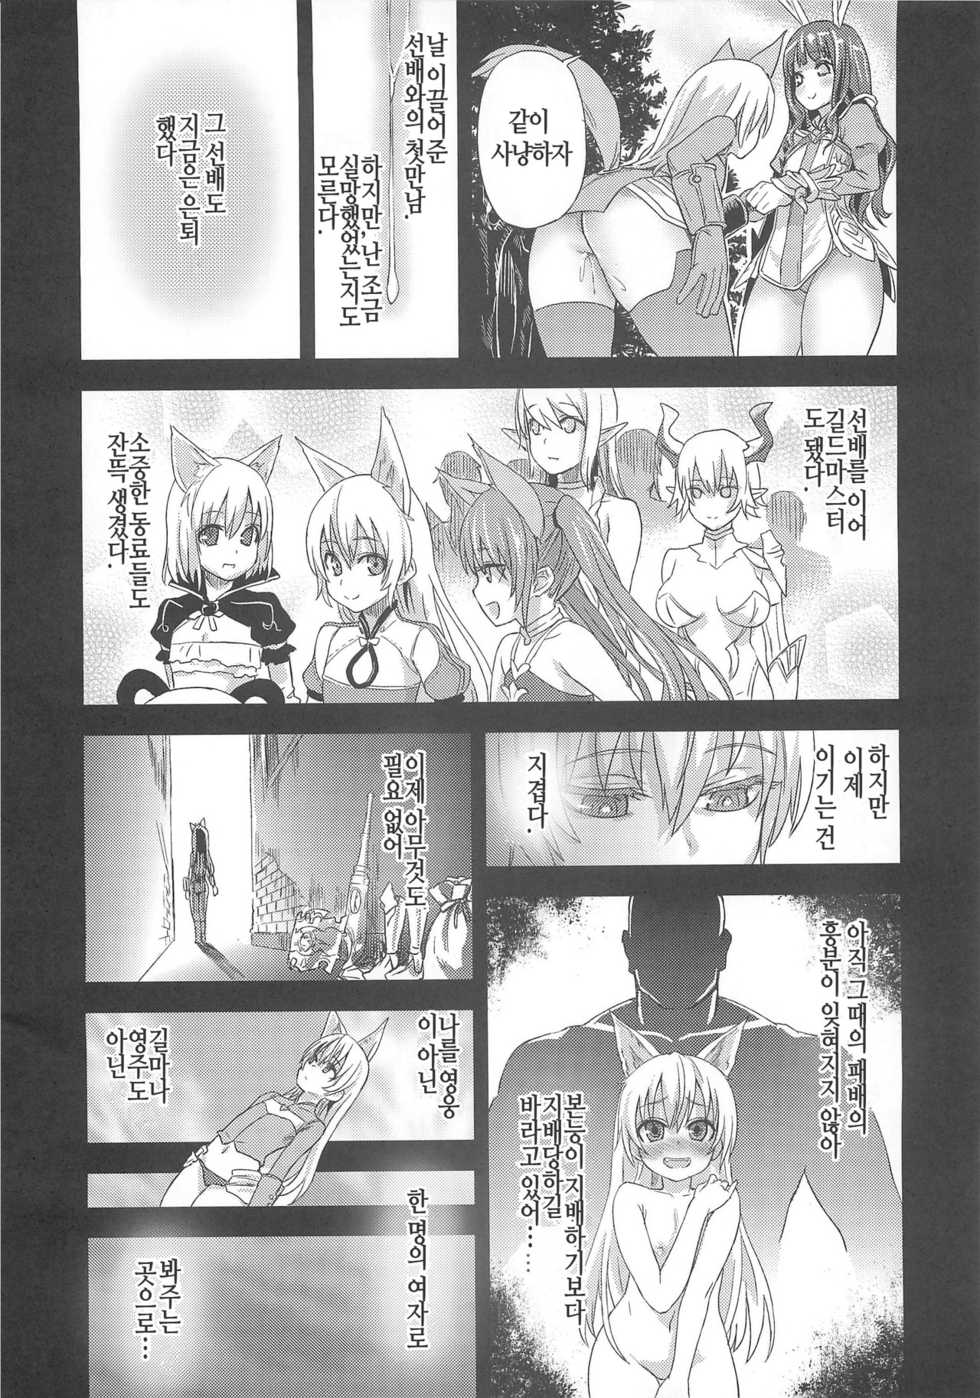 (C81) [Fatalpulse (Asanagi)] Victim Girls 12 Another one Bites the Dust (TERA The Exiled Realm of Arborea) [Korean] [Project H] - Page 6